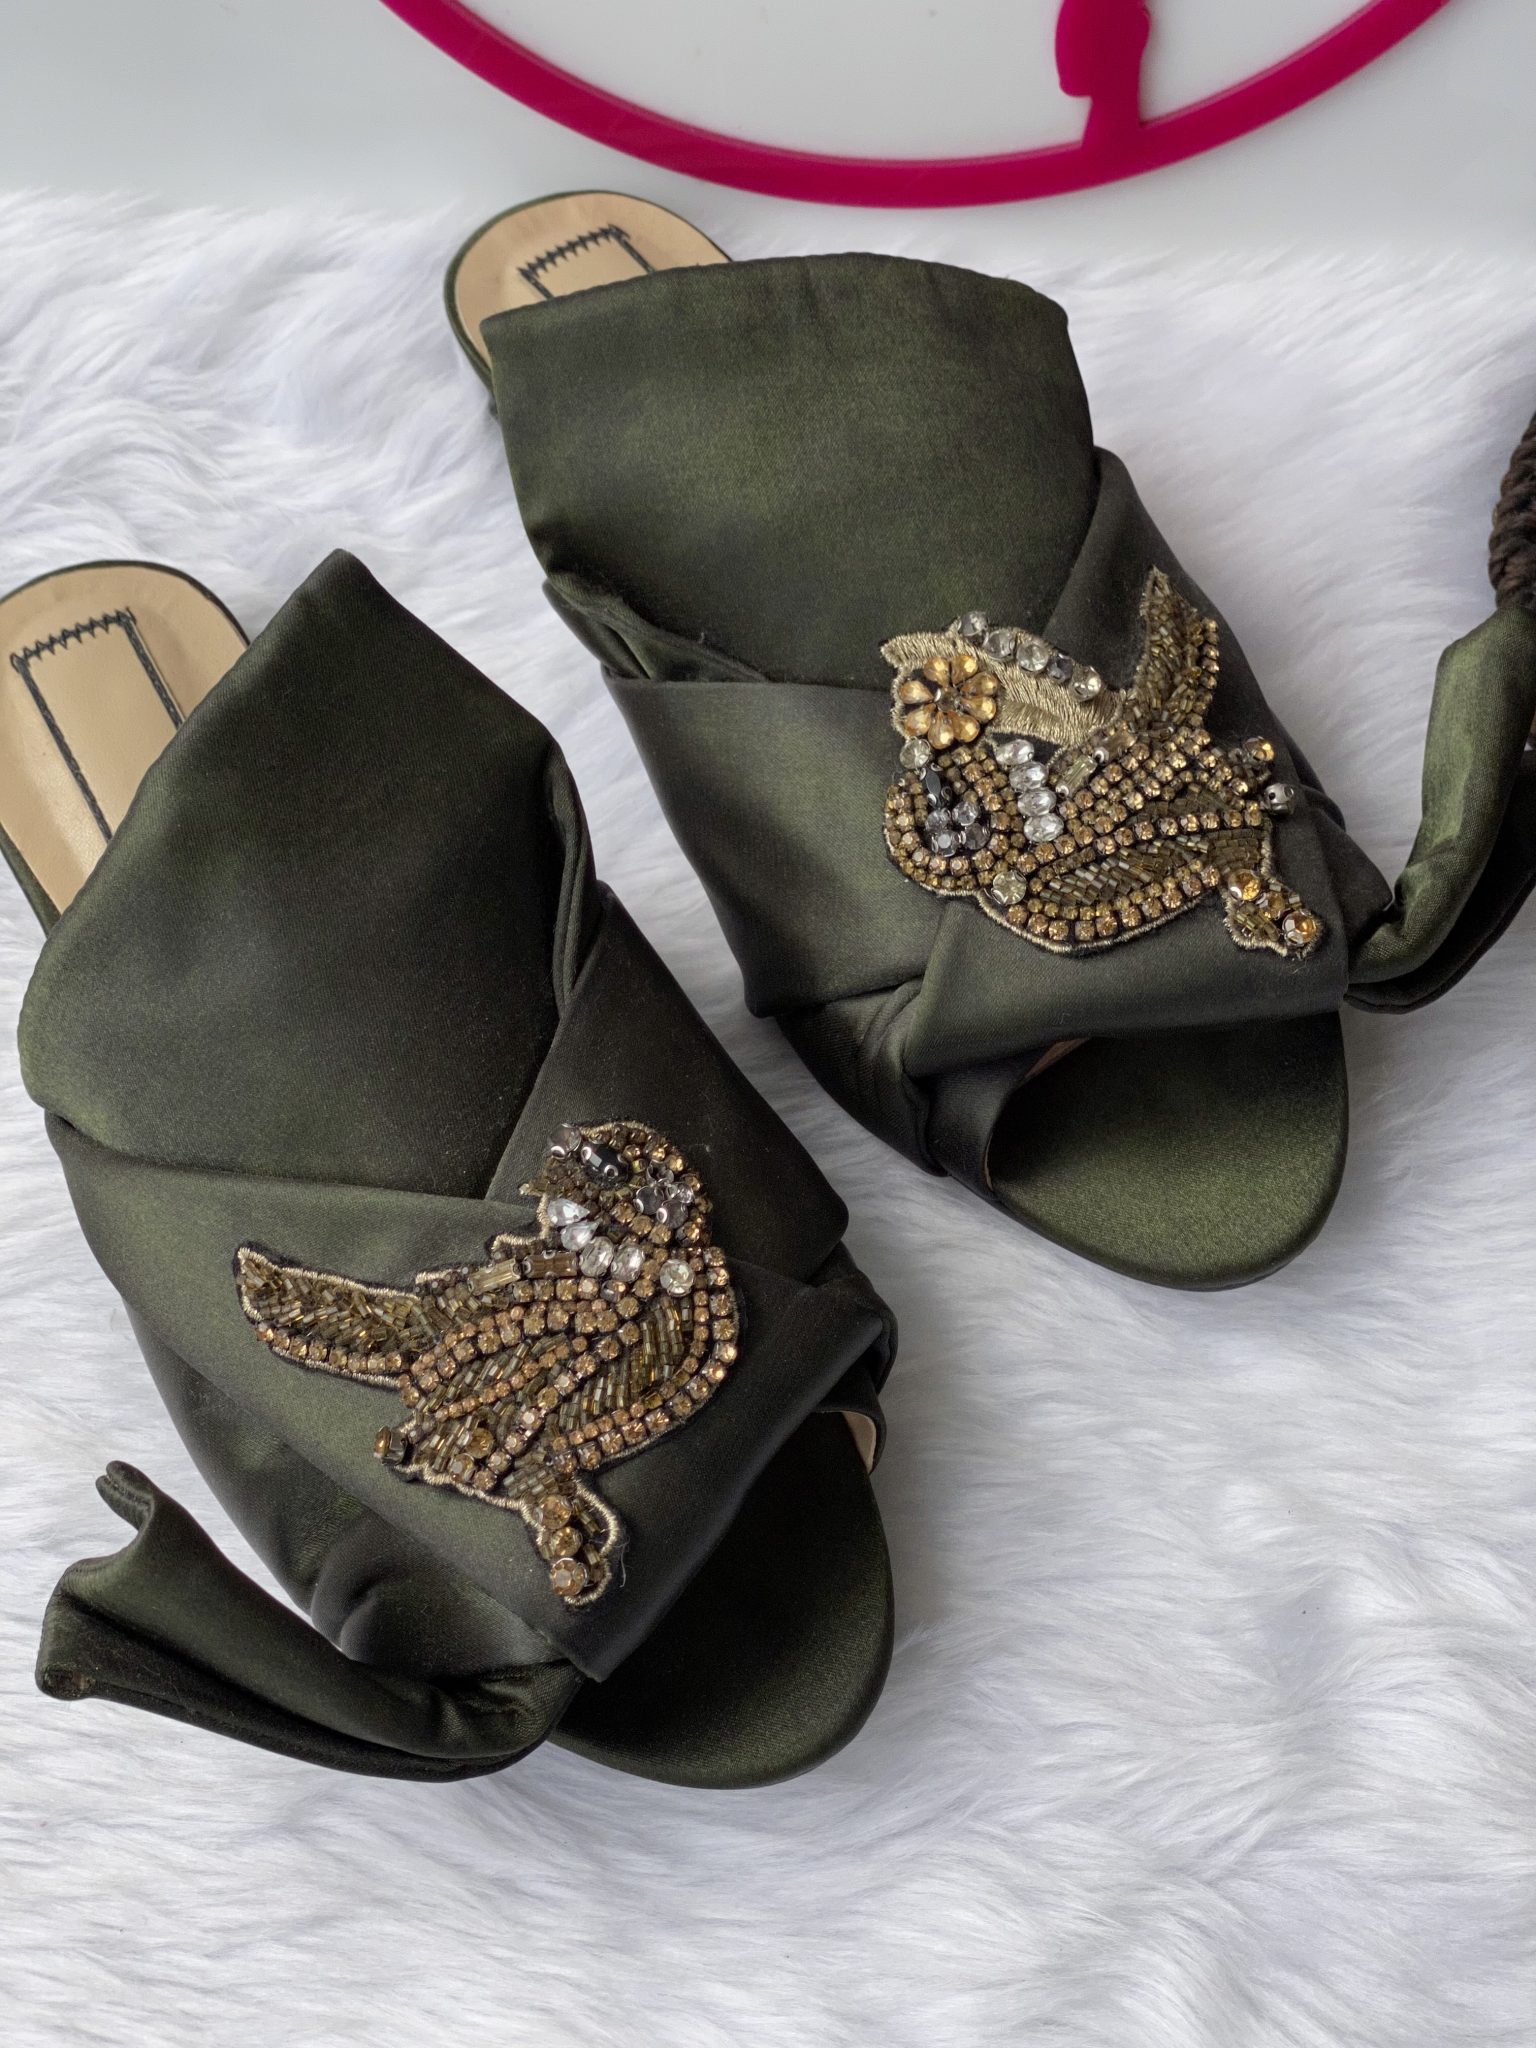 N21 Bow Embellished Slippers Green Size 39. - Canon E-Bags Prime